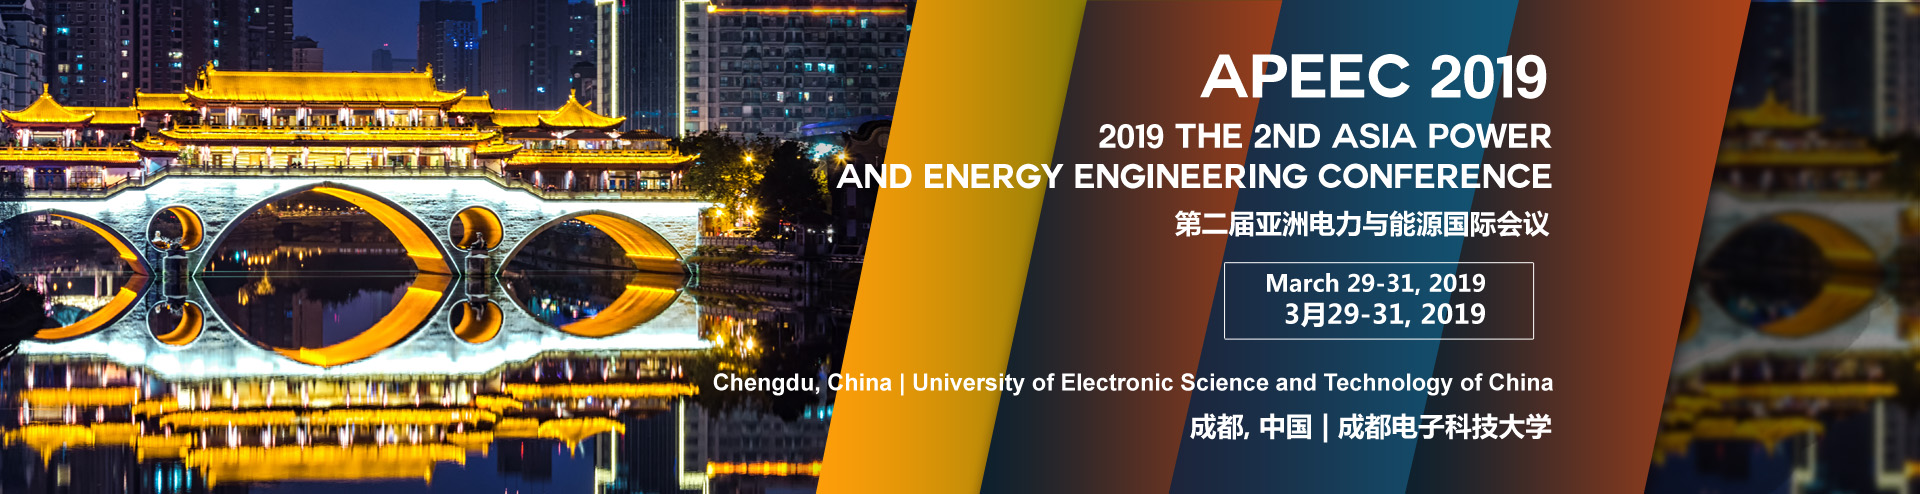 IEEE--2019 The 2nd Asia Power and Energy Engineering Conference (APEEC 2019)--EI Compendex, Scopus, Chengdu, Sichuan, China